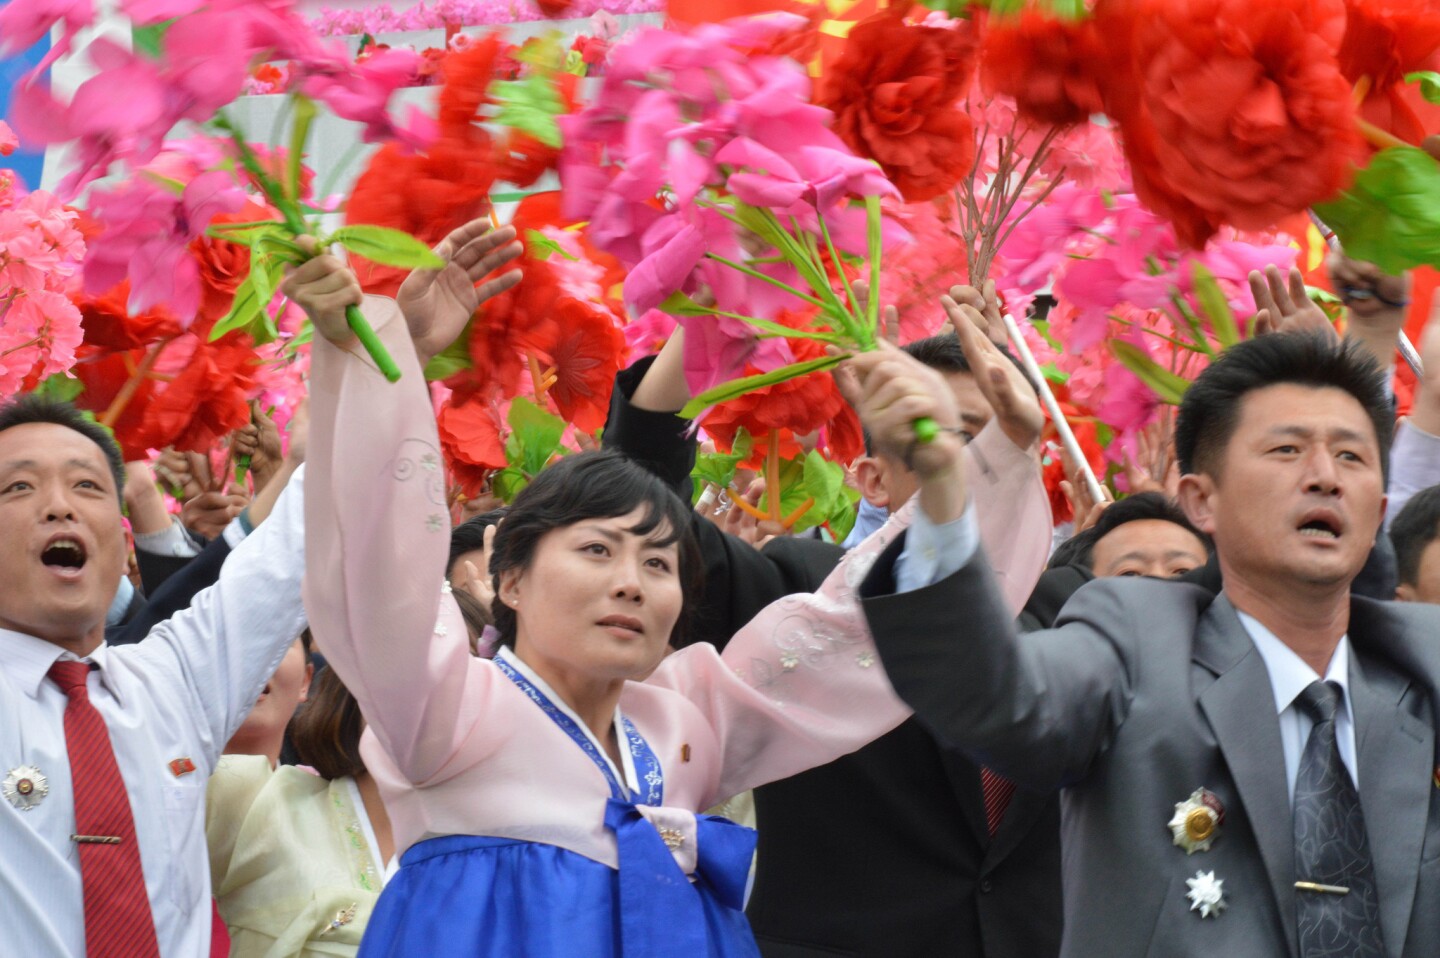 North Korean parade participants wave decorative bouquets of flowers and carry their country's national flag as they march at Kim Il Sung Square in Pyongyang, North Korea.